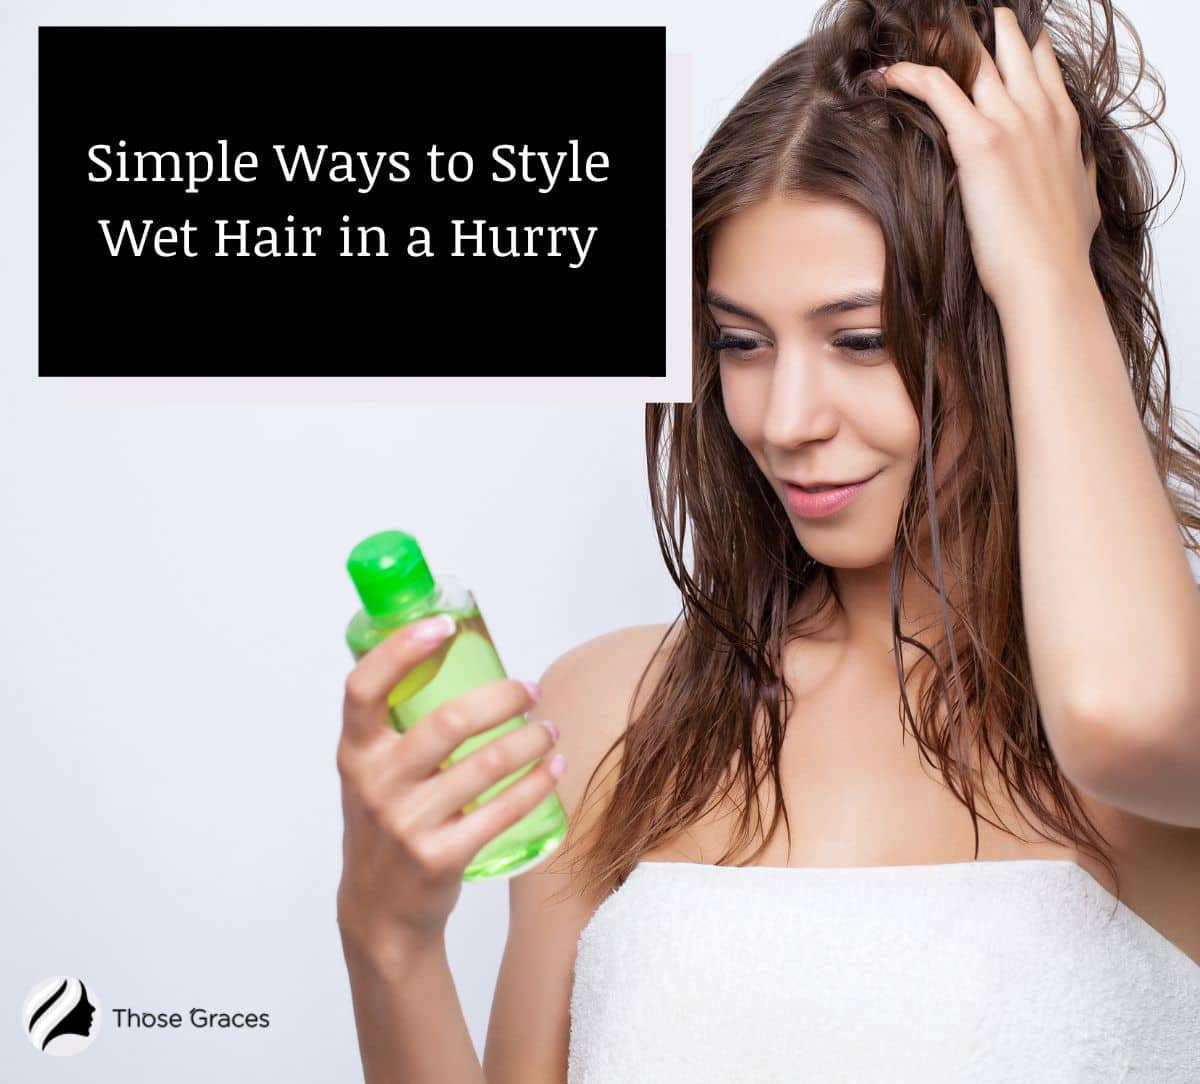 lady wondering how to style wet hair in a hurry